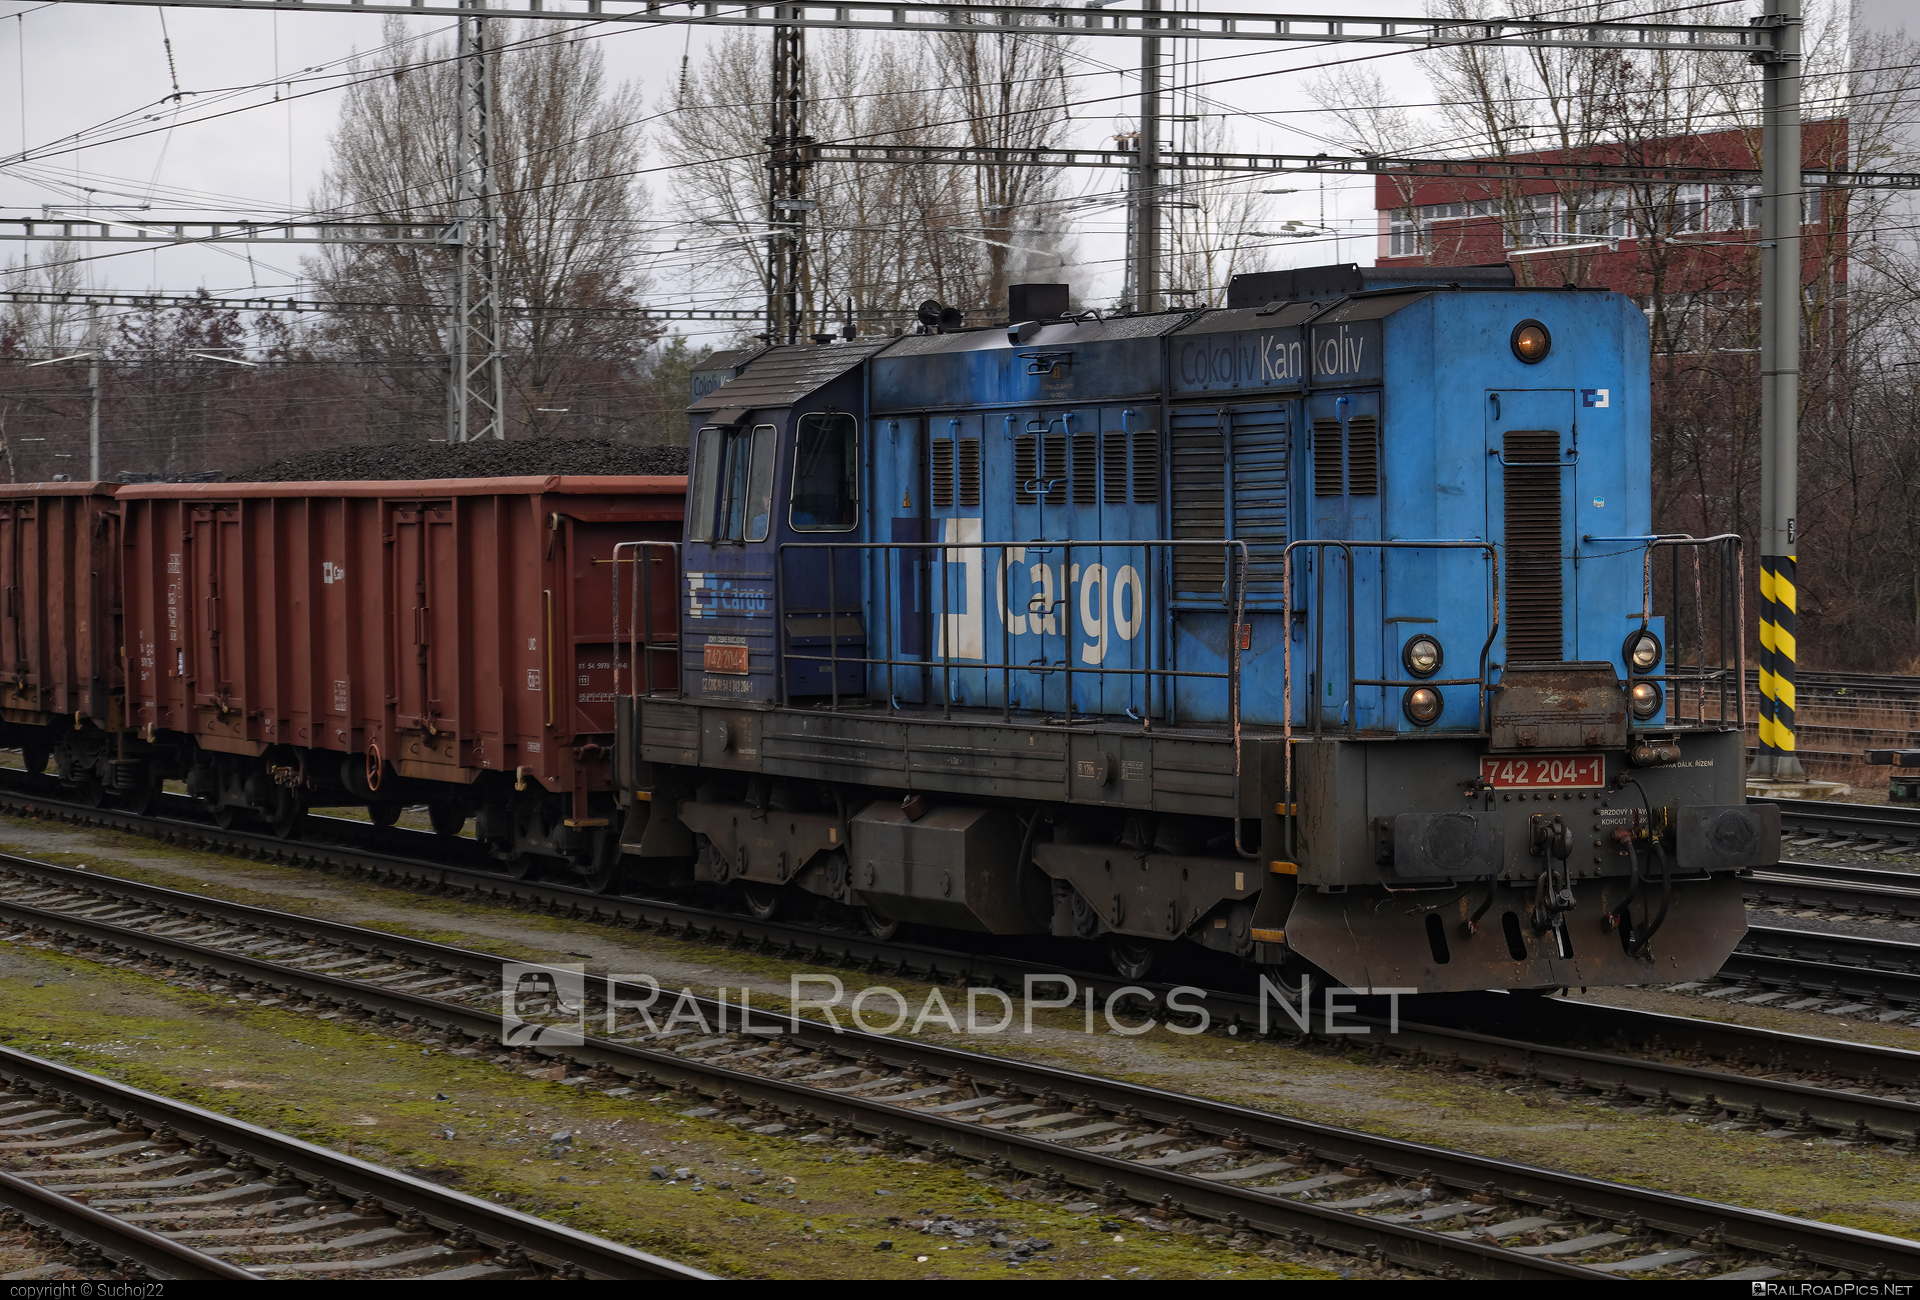 ČKD T 466.2 (742) - 742 204-1 operated by ČD Cargo, a.s. #cdcargo #ckd #ckd4662 #ckd742 #ckdt4662 #kocur #openwagon